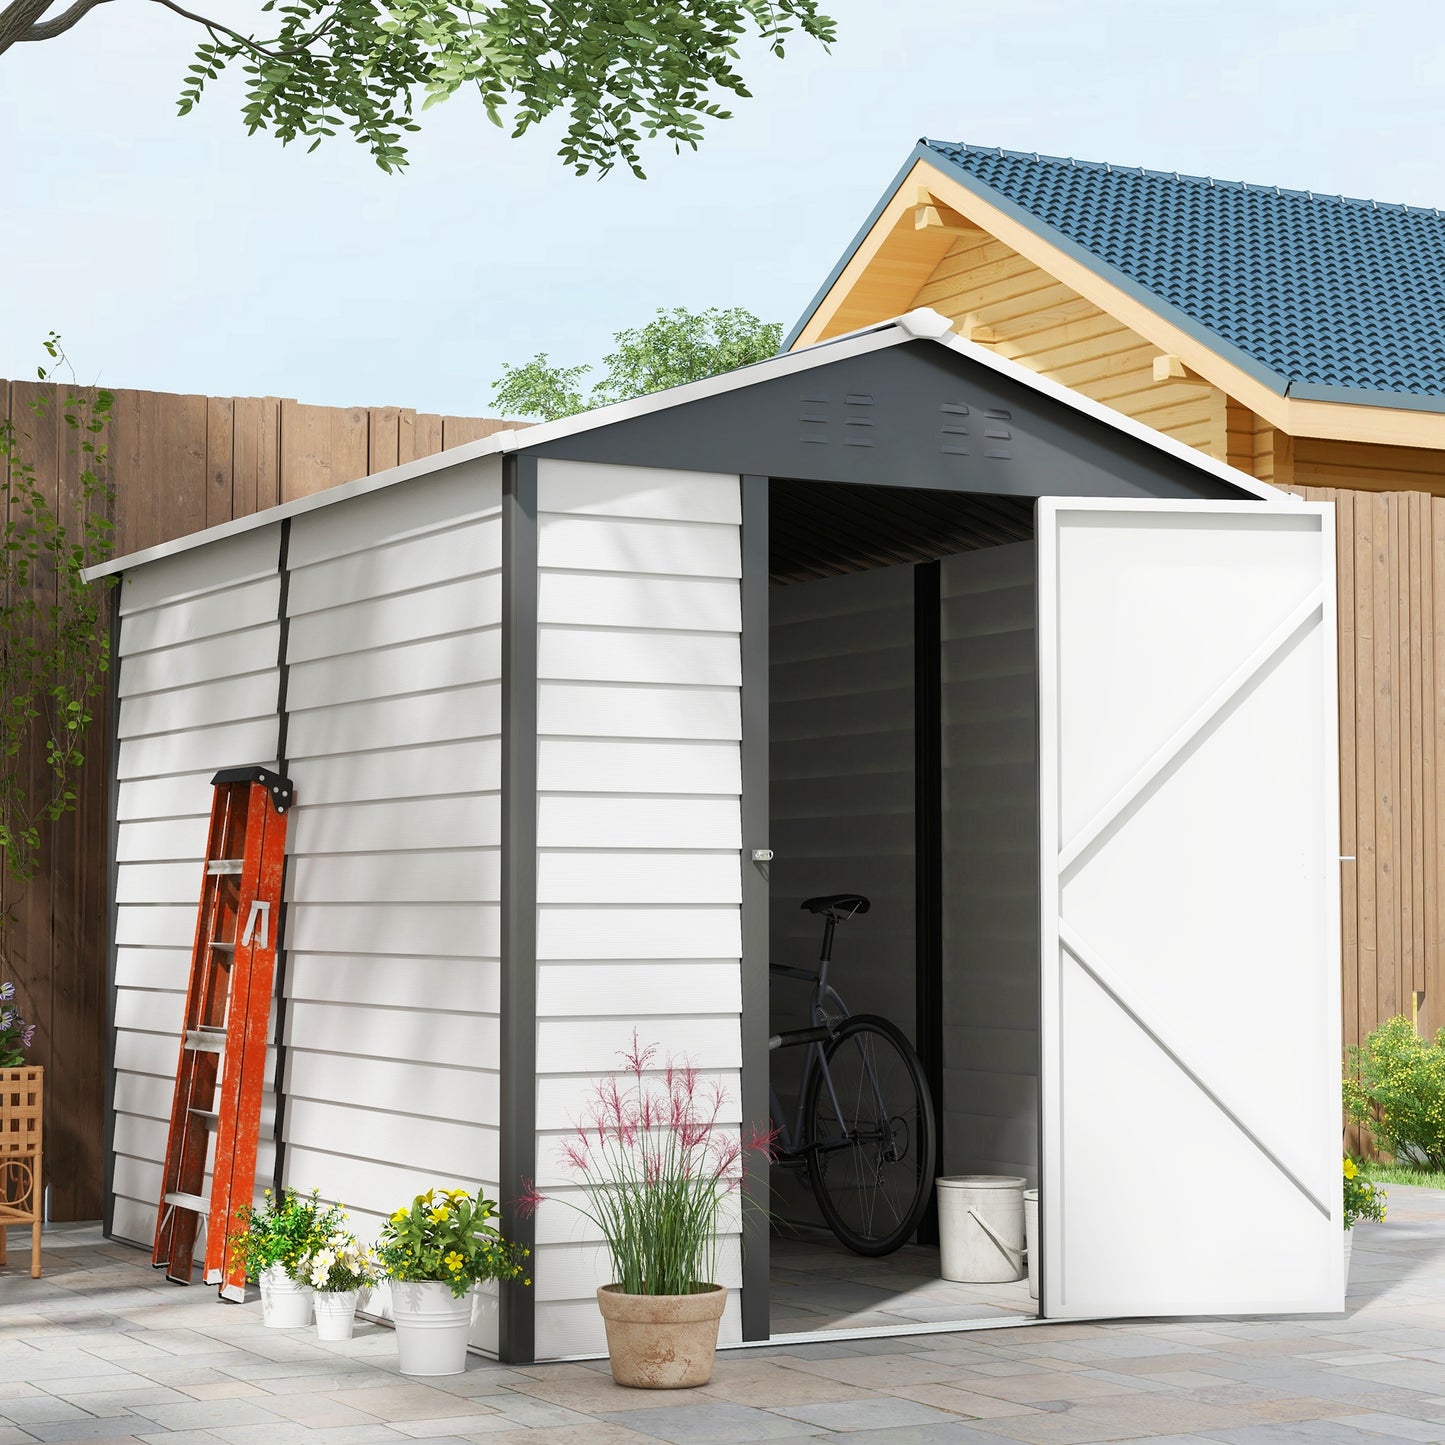 Outsunny 9x 6FT Metal Outdoor Garden Shed, Galvanised Tool Storage Shed w/ Sloped Roof, Lockable Door for Patio Lawn, Dark Grey